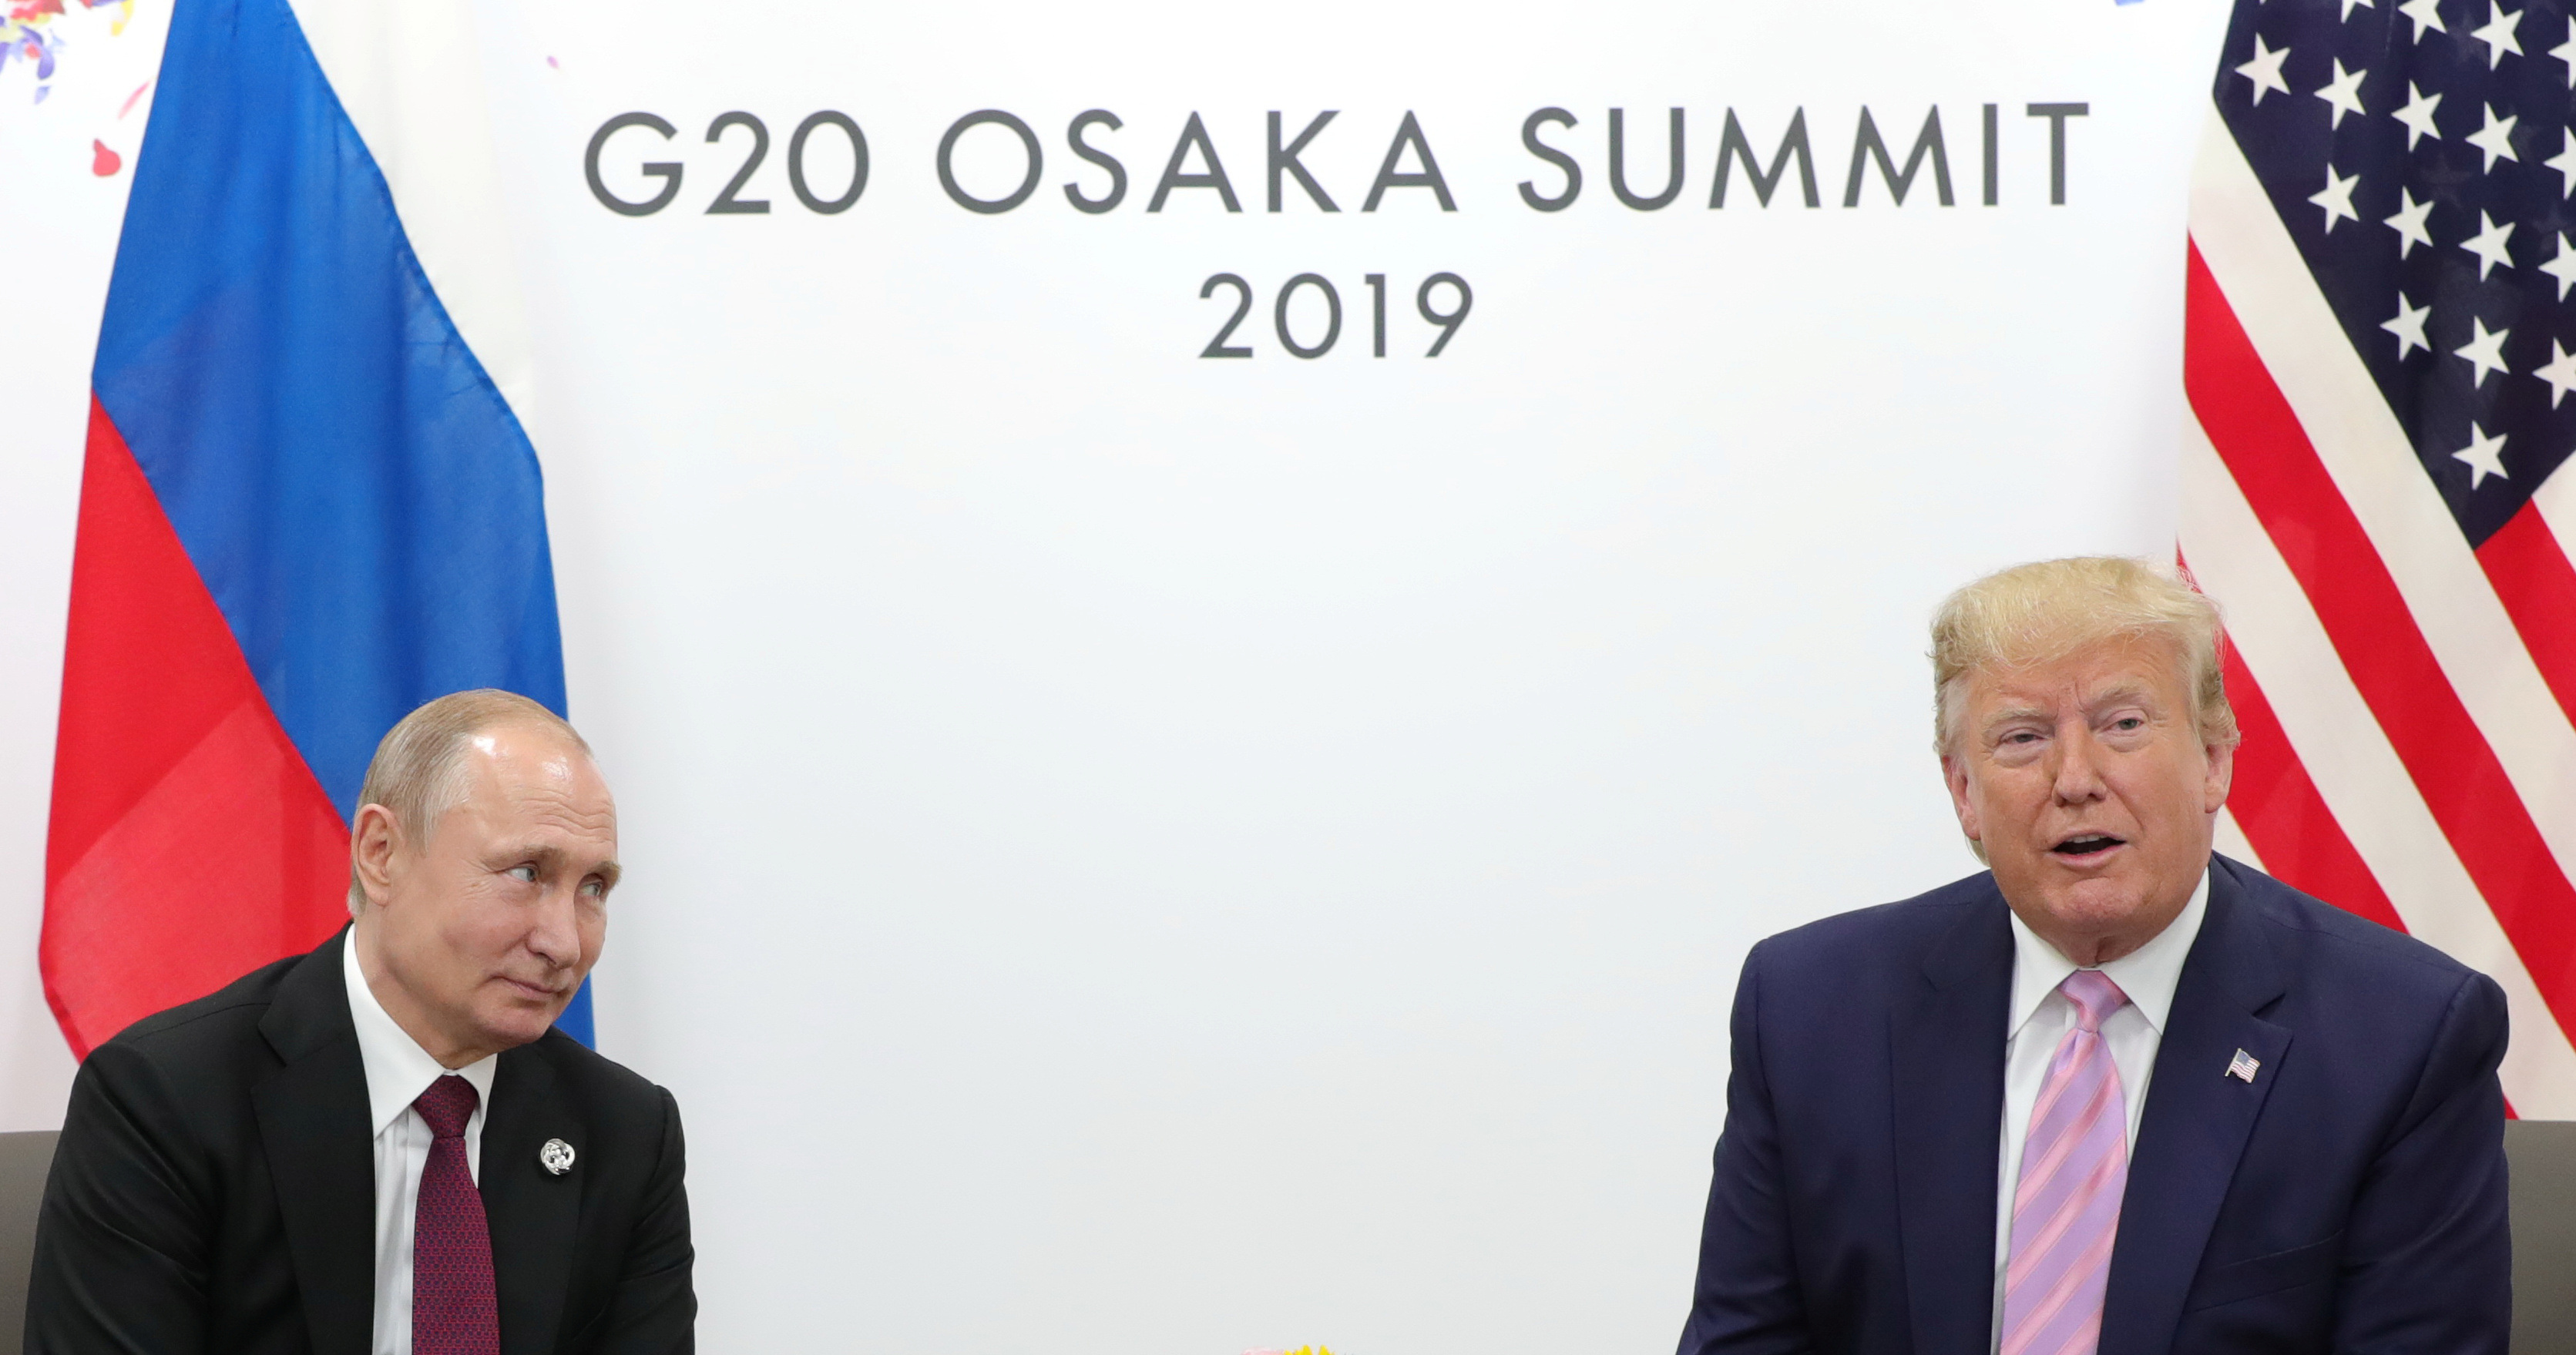 Russia's President Vladimir Putin and U.S. President Donald Trump attend a meeting on the sidelines of the G20 summit in Osaka